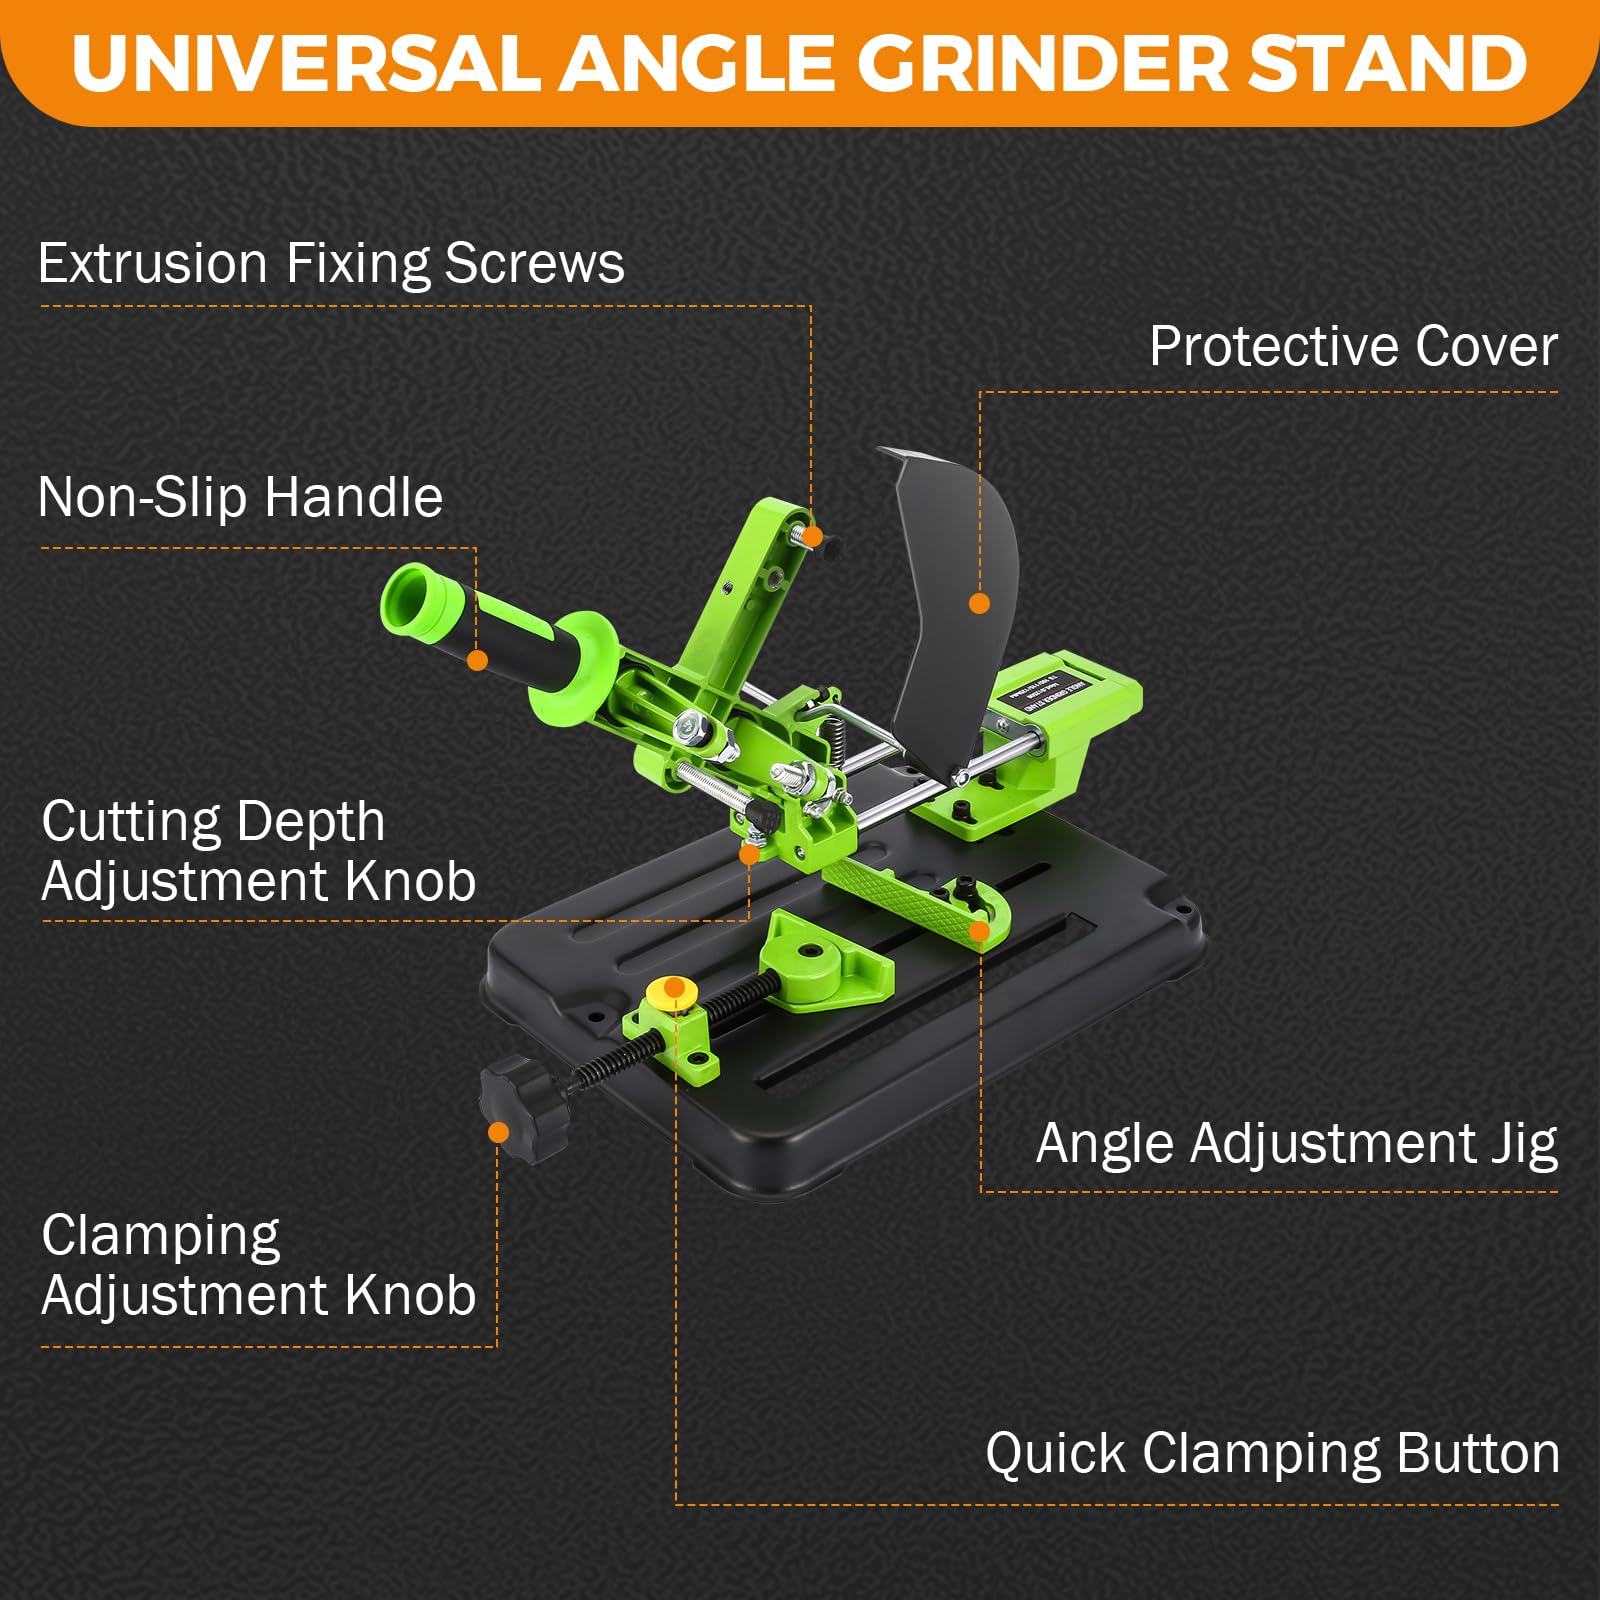 BEAMNOVA Upgraded Angle Grinder Stand Universal Fixed Grinder Holder Sliding Handle Bracket Adjustable 45 Degree Clamp with Protective Cover